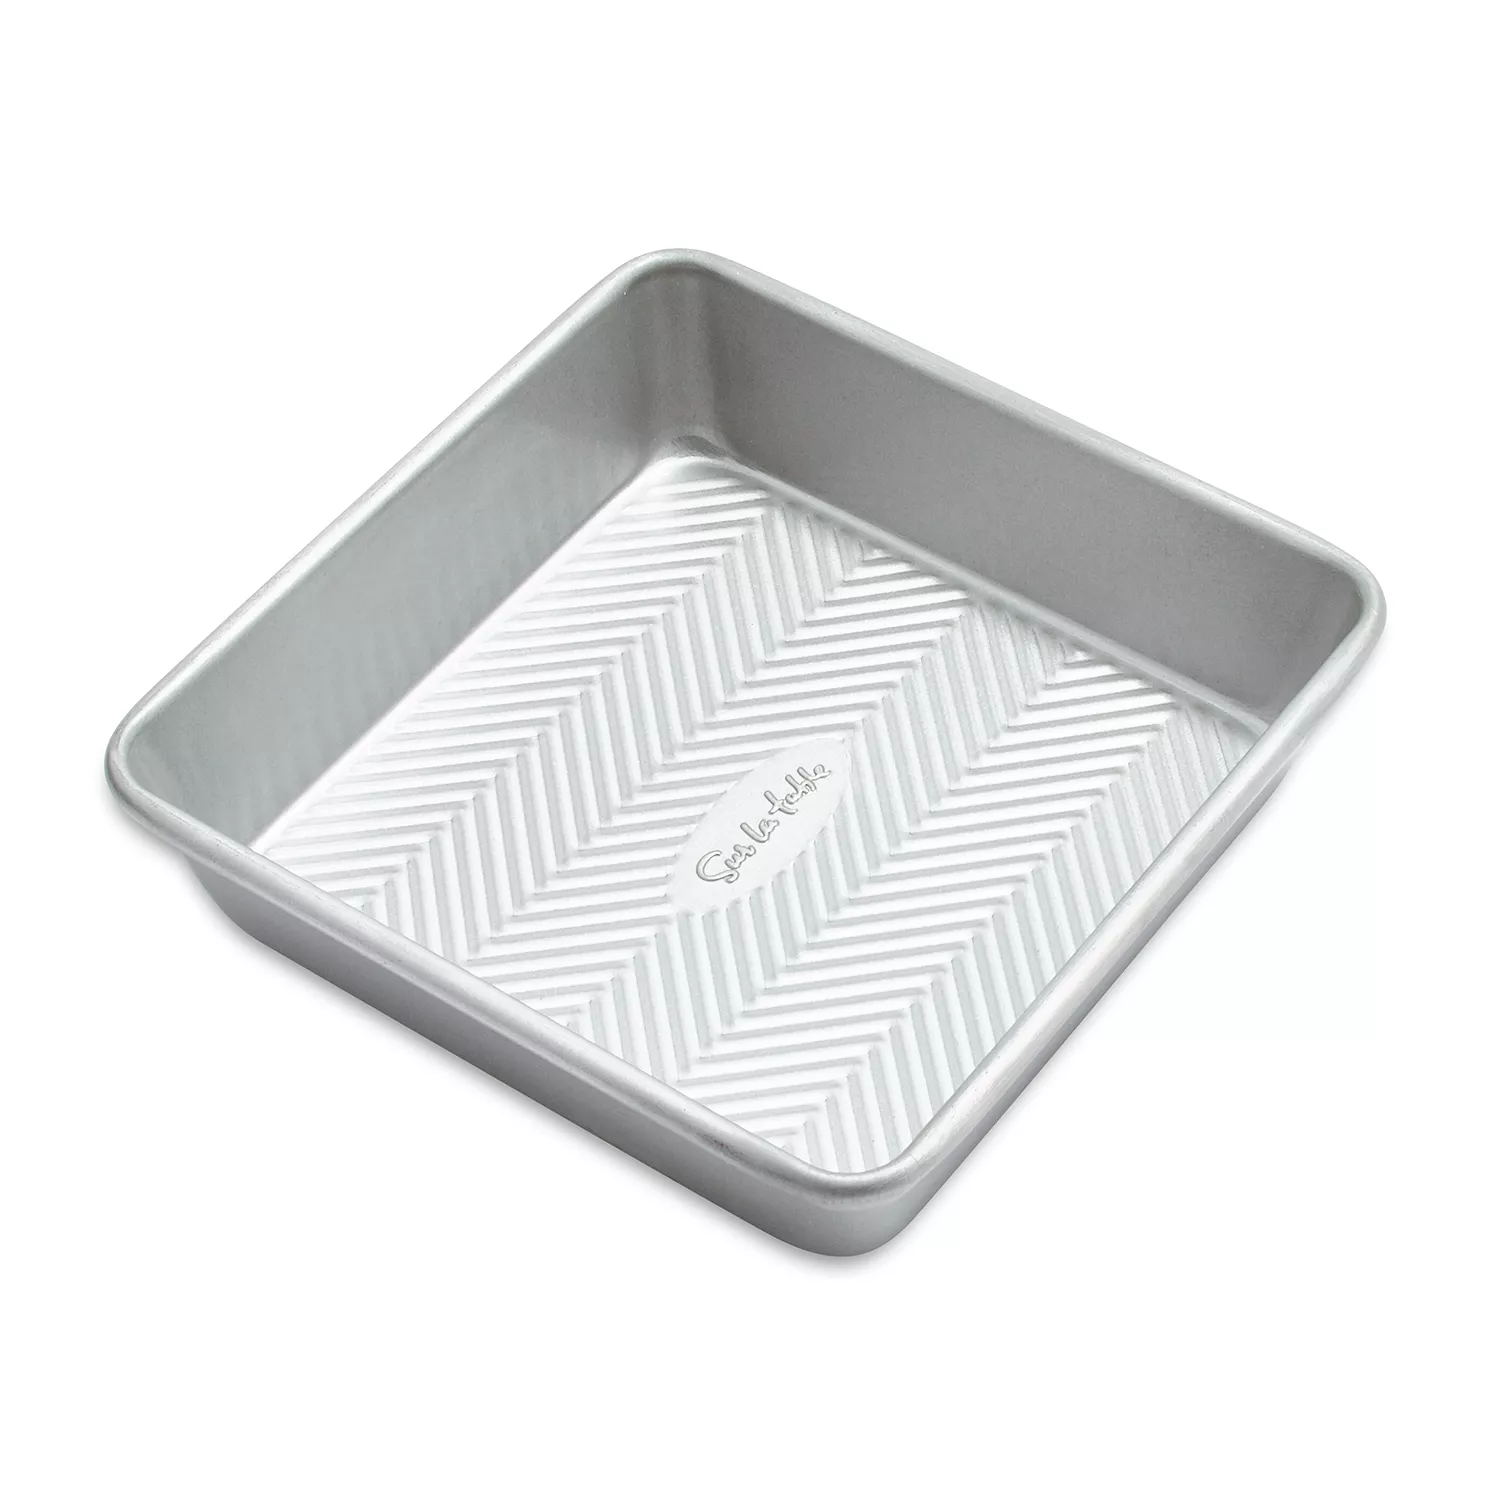 8x8 Foil Pans with Lids (20 Pack) 8 Inch Square Aluminum Pans with Covers  -Disposable Food Containers Great for Baking Cake, Cooking, Heating